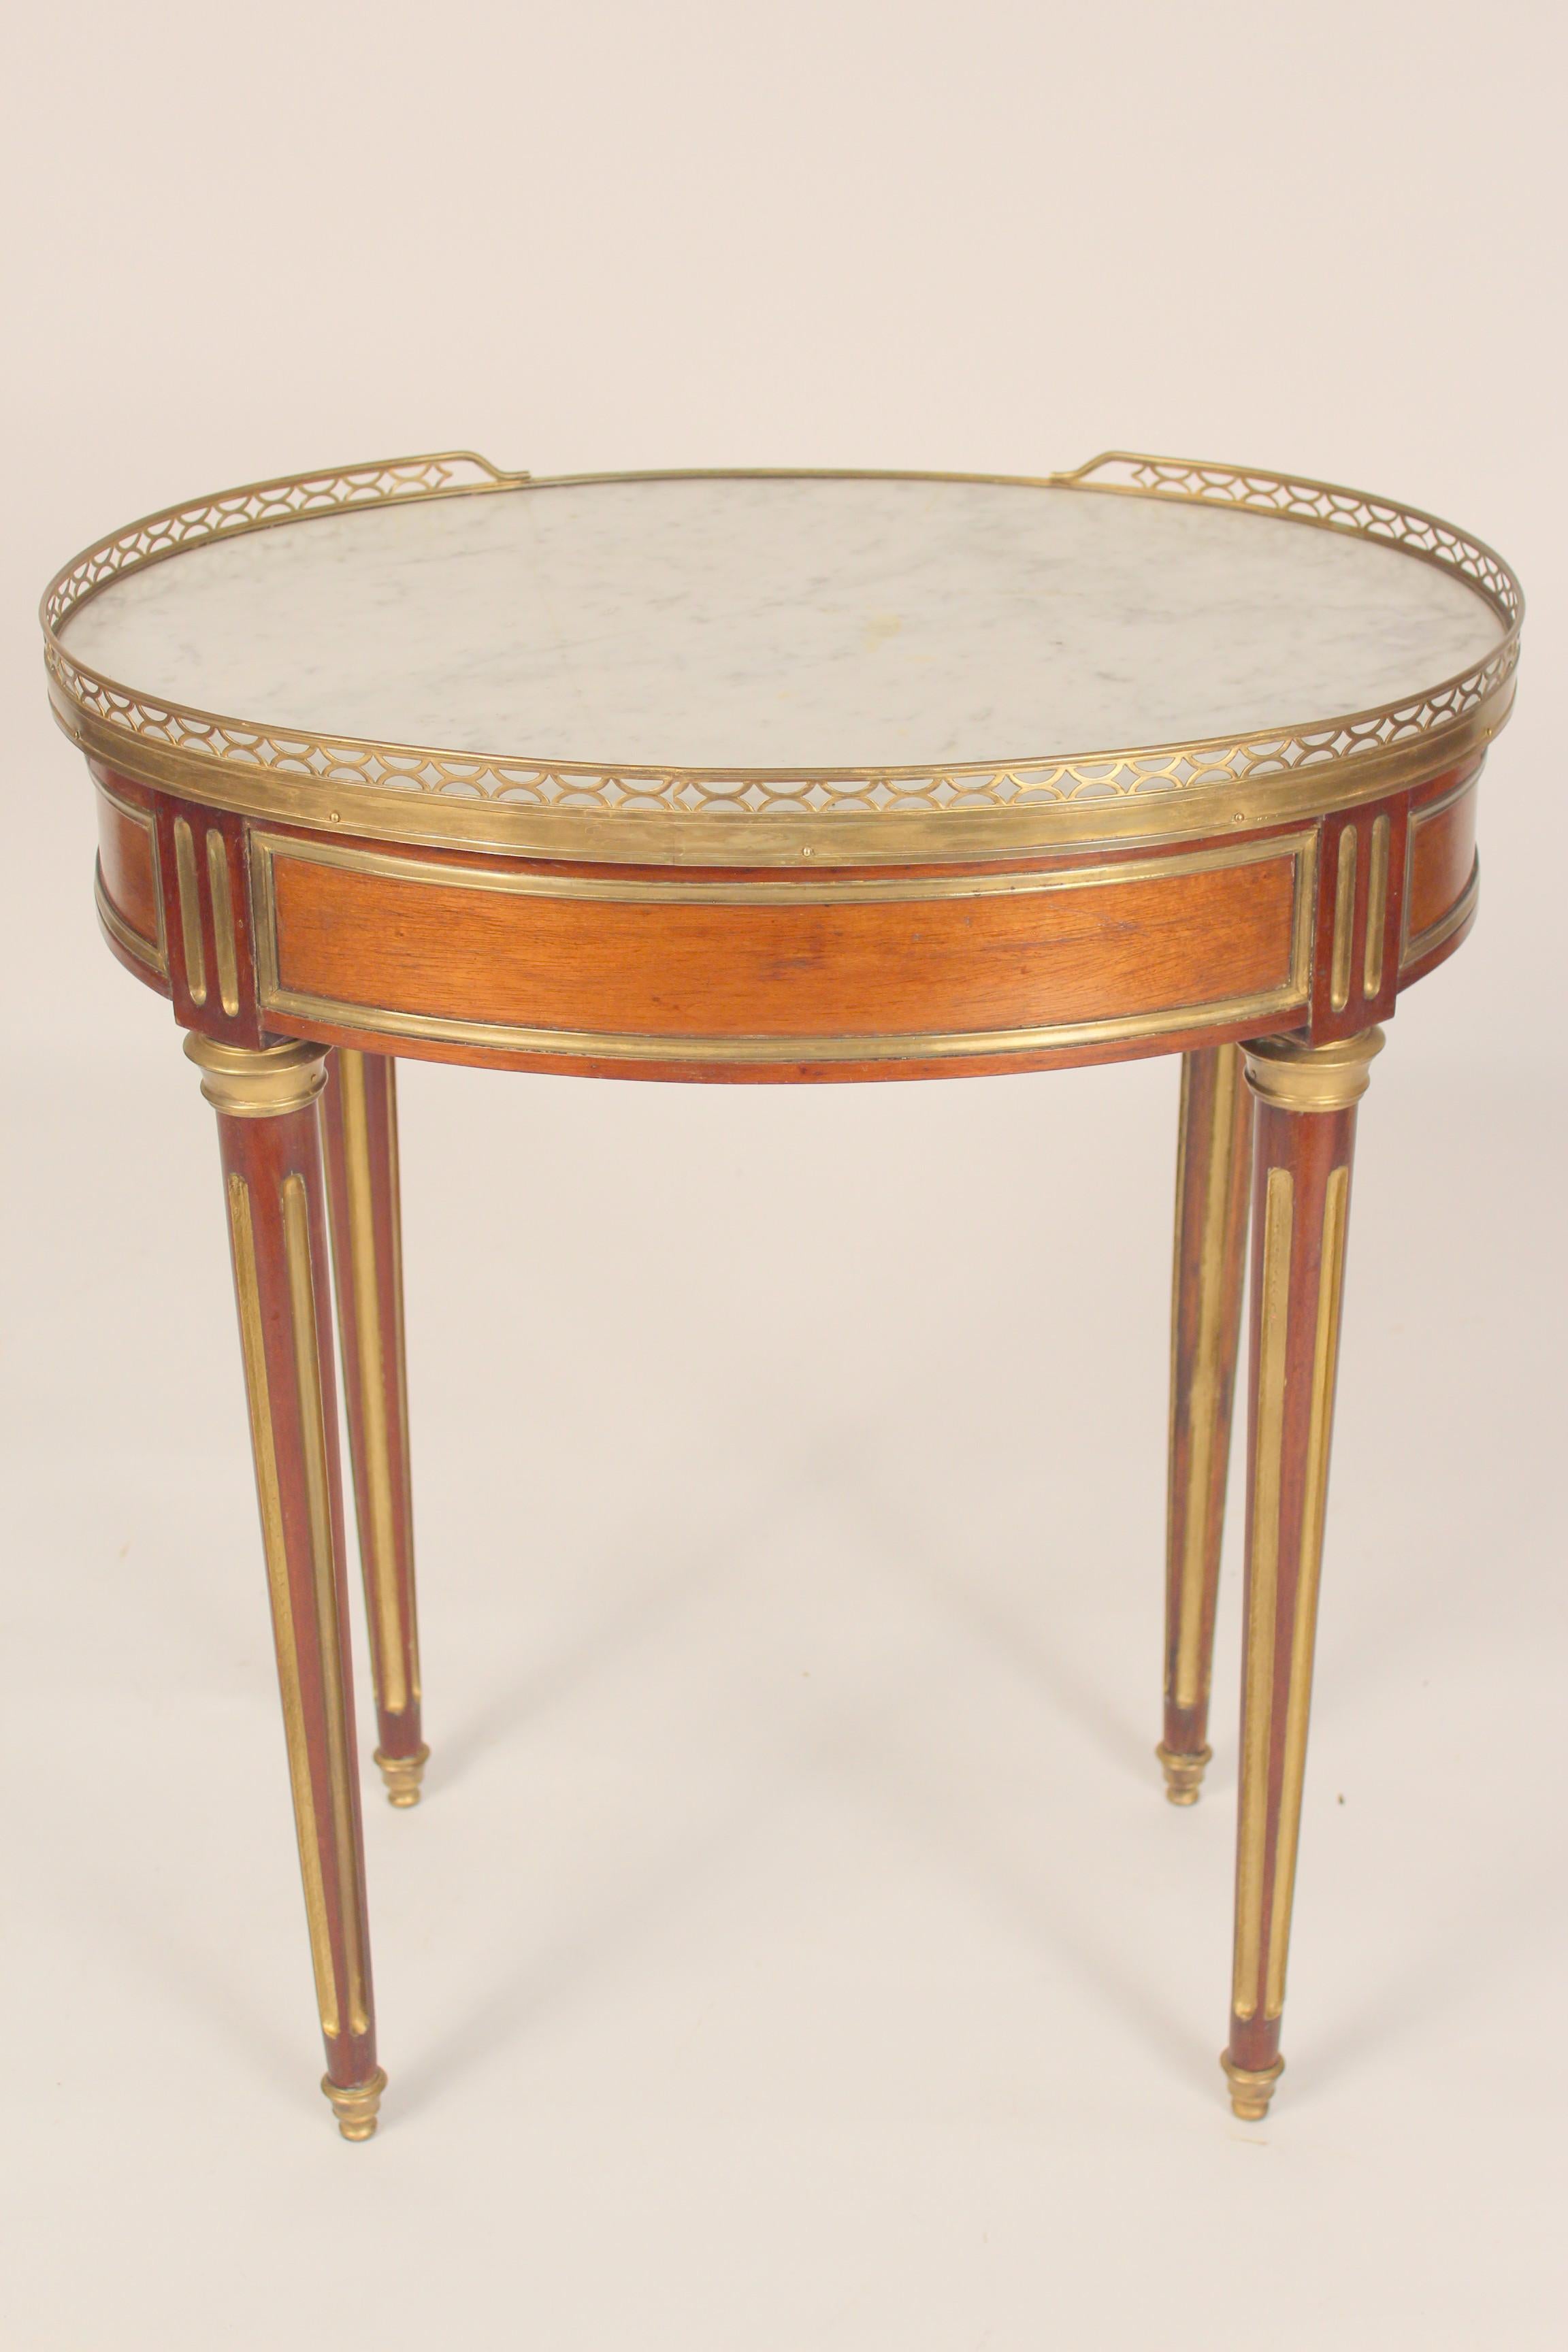 19th Century Antique Louis XVI Style Brass Mounted Mahogany Occasional Table For Sale